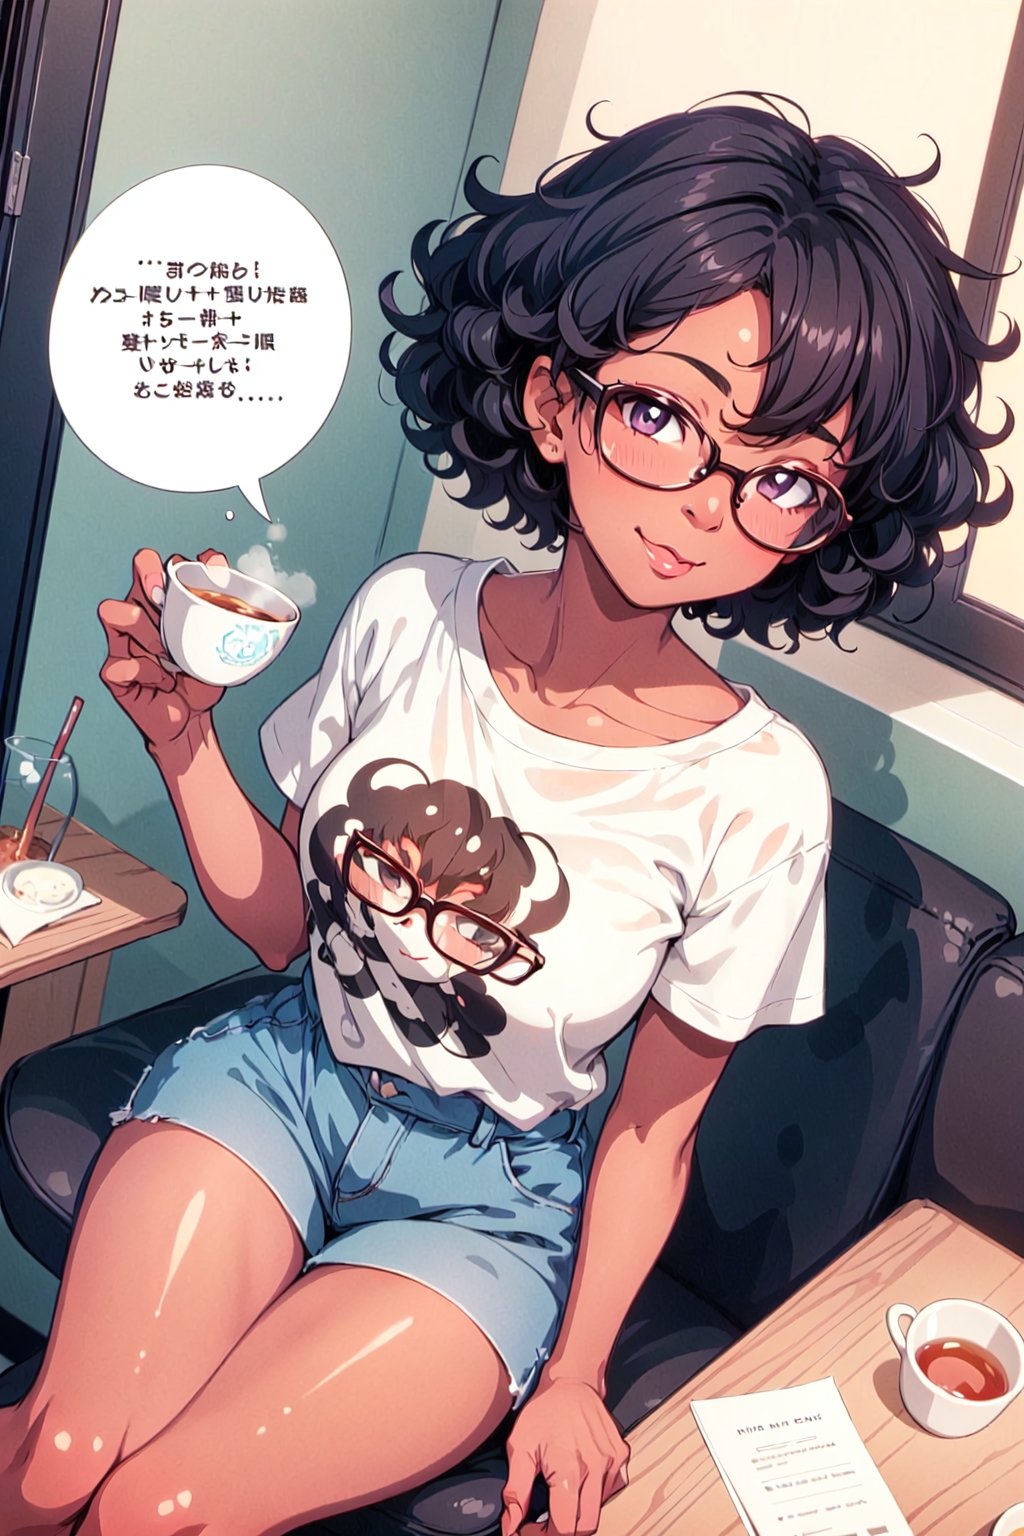 1 girl, black american with short curly hair, graphic tee, at home drinking tea, cute big glasses, view from above, naked/nude, toned legs, happy, cute, anime style, good proportions, seducing eyes, blushing, text bubbles, seductive, looking up at viewer